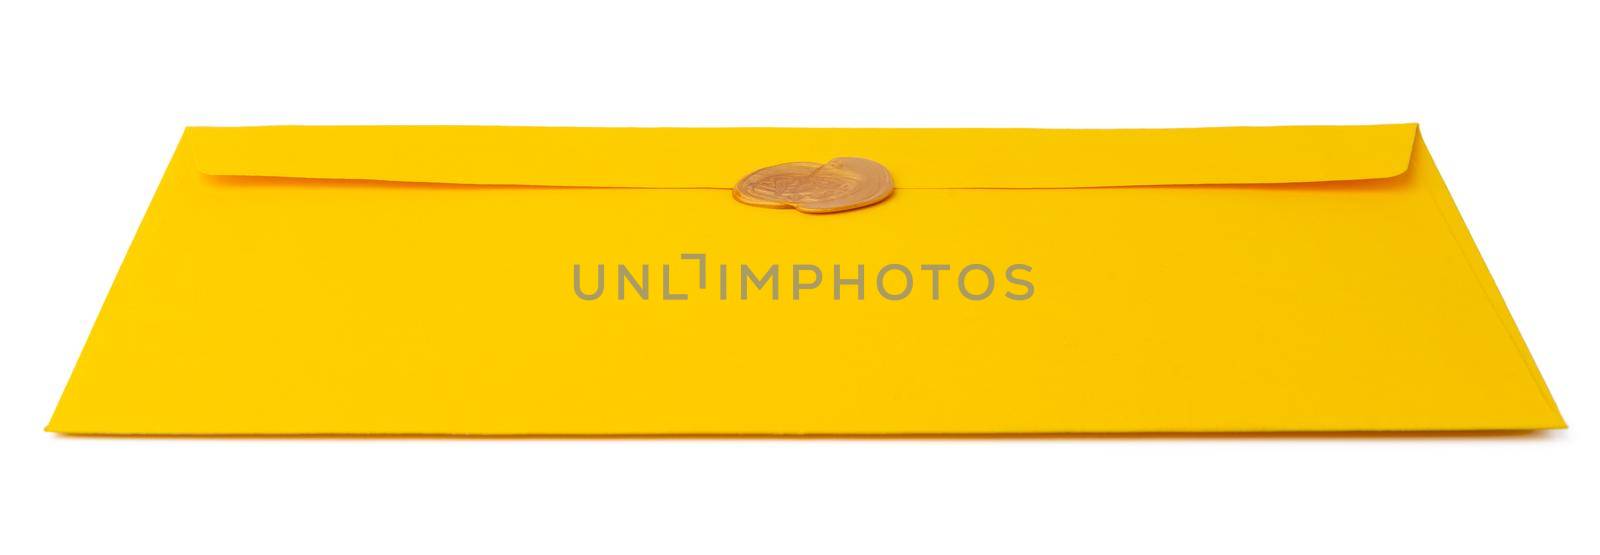 yellow envelope isolated on white background. top view